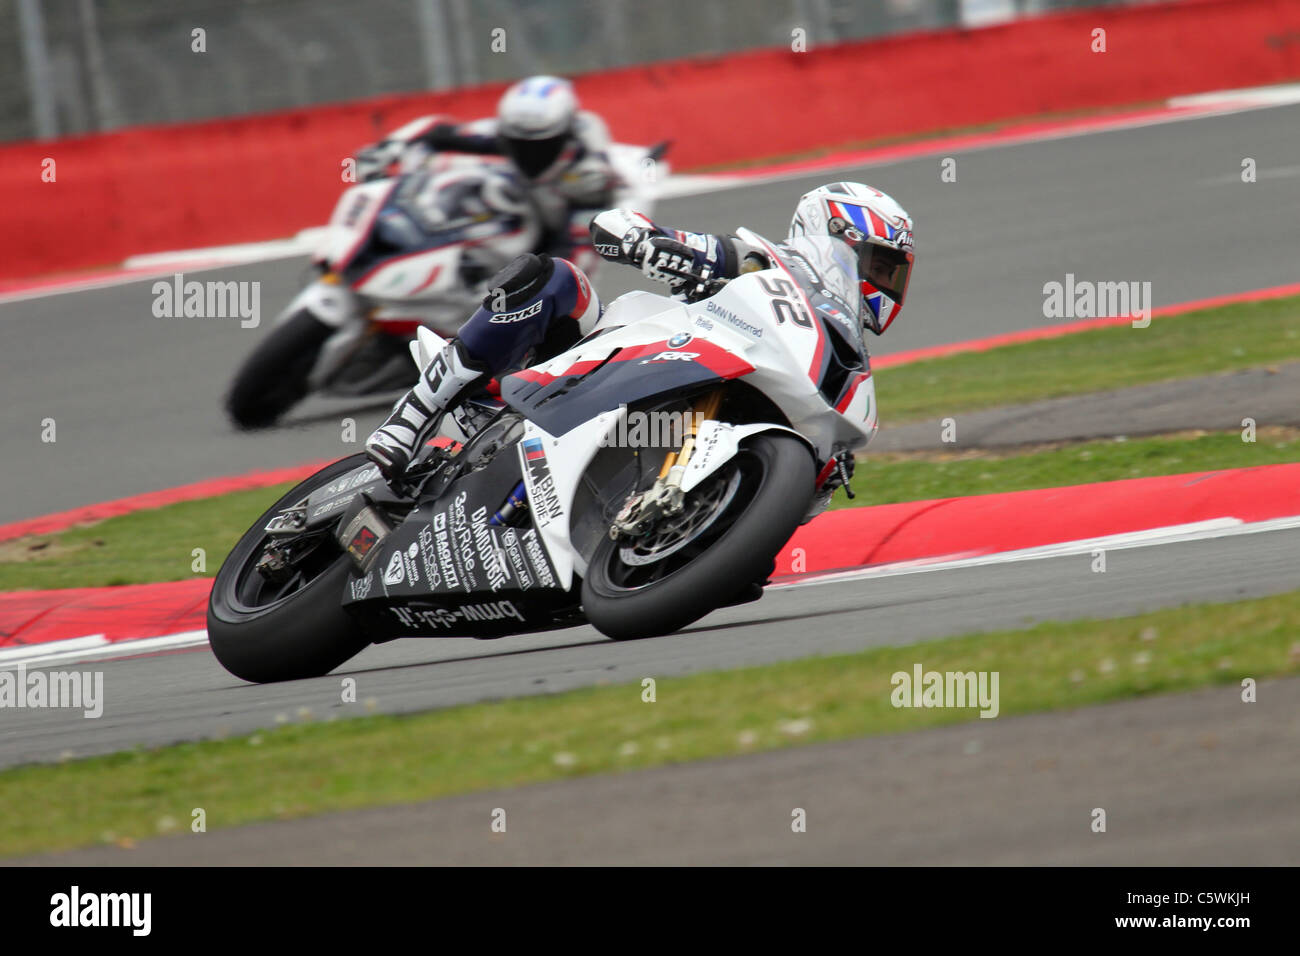 James Toseland leads teammate Leon Haslam through Village complex during second Friday practice at Silverstone Stock Photo